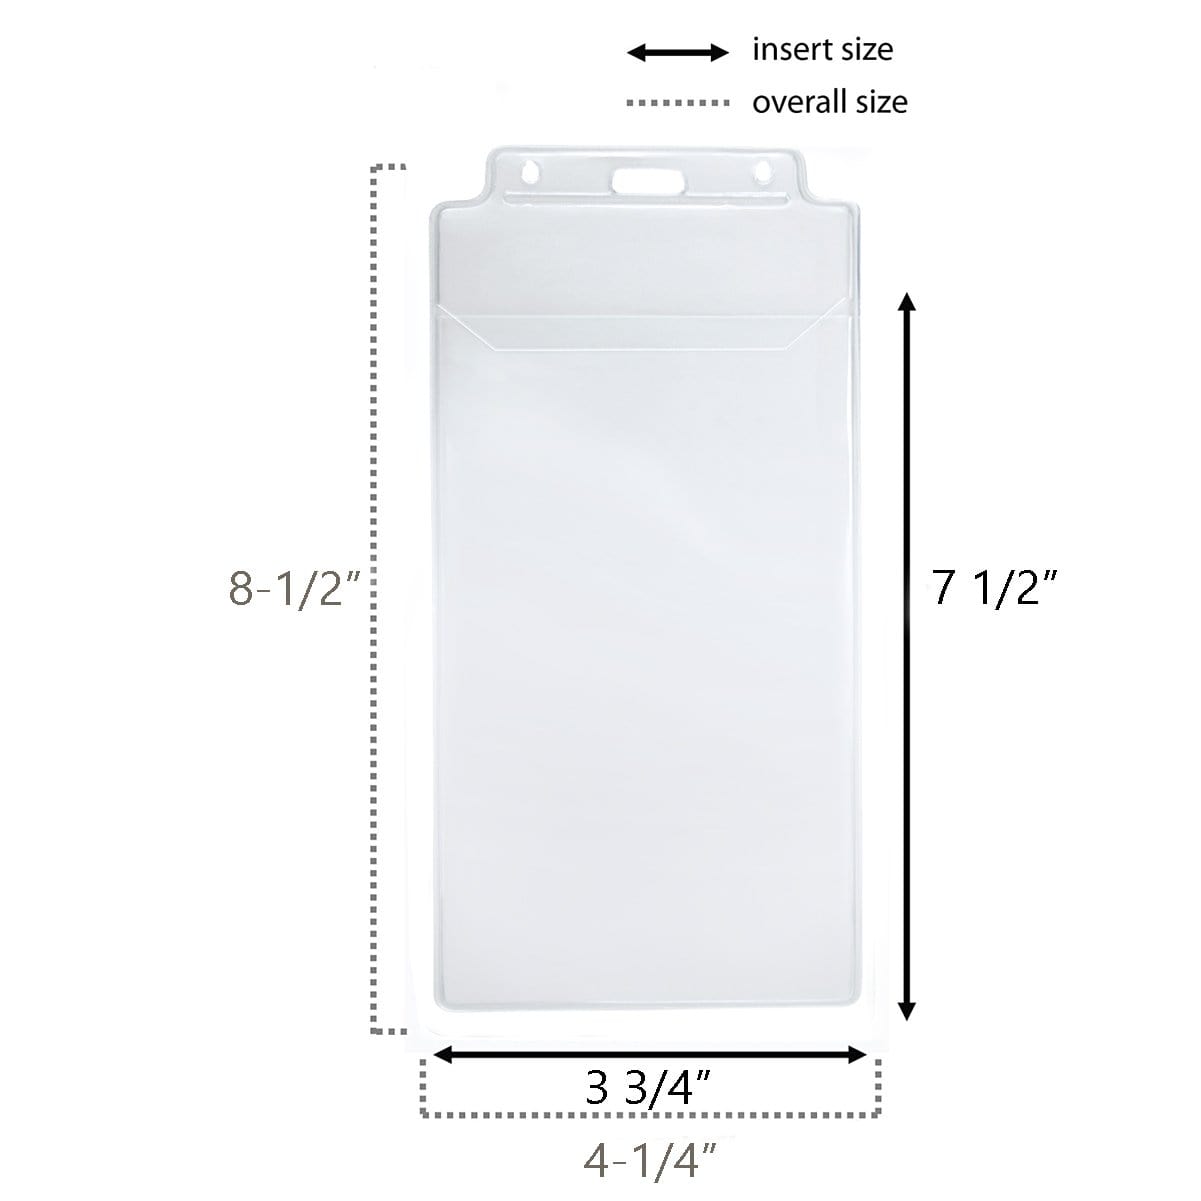 Clear 3 3/4 x 7 1/2 Vinyl Vertical Event Size Holder with Tuck-In Flap (p/n 1840-1600)